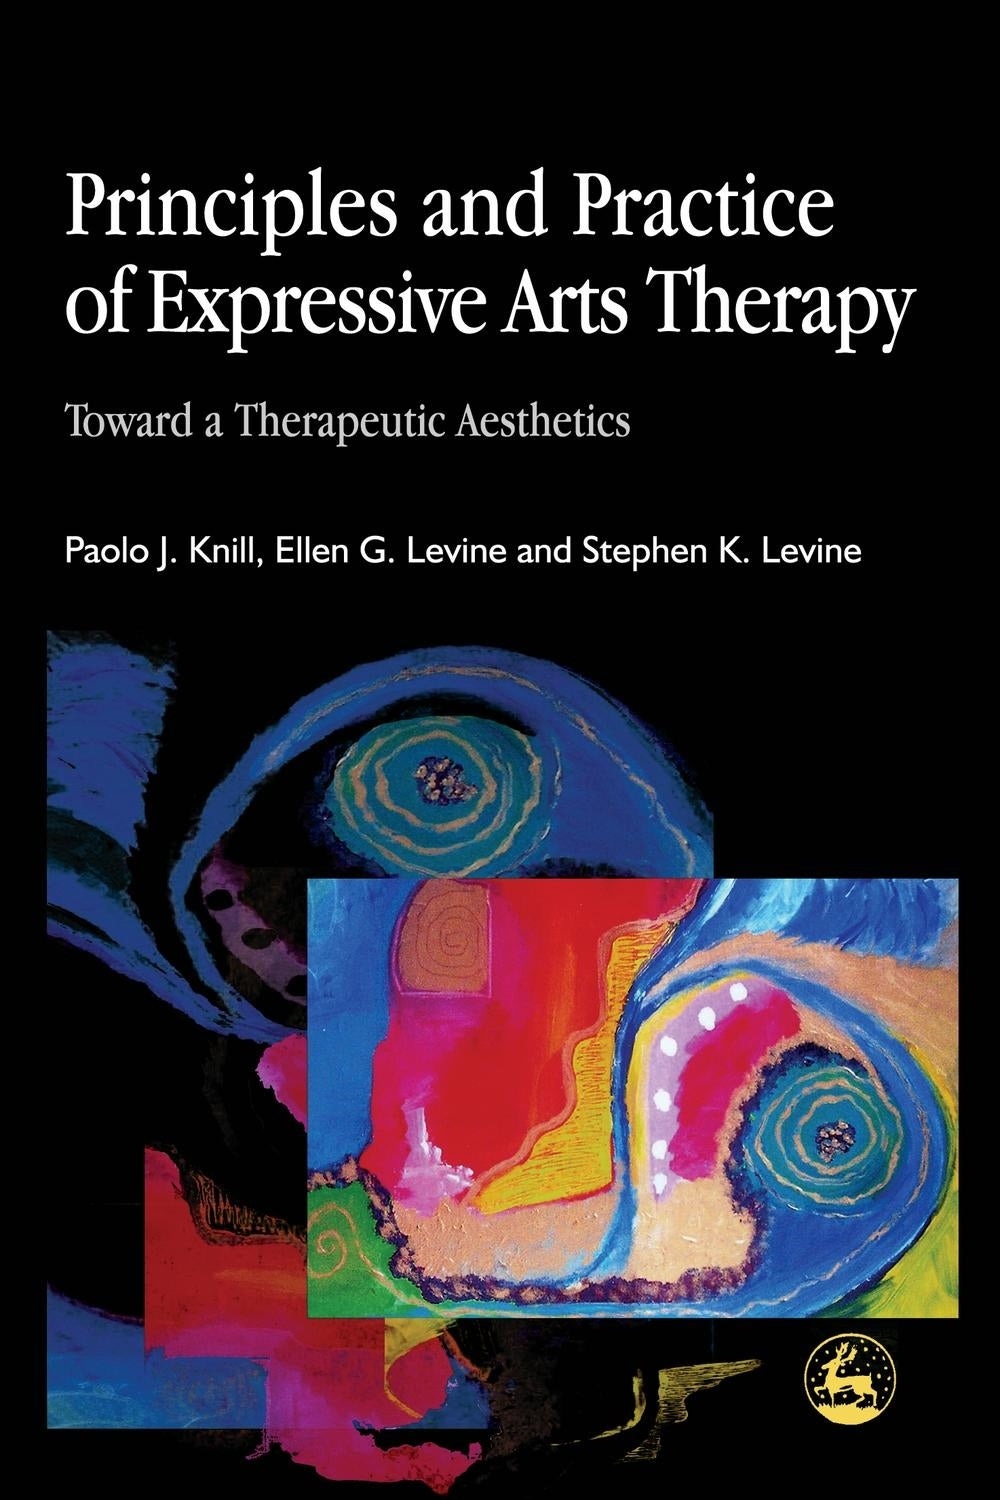 Principles and Practice of Expressive Arts Therapy by Stephen K. Levine, Paolo J. Knill, Ellen G. Levine